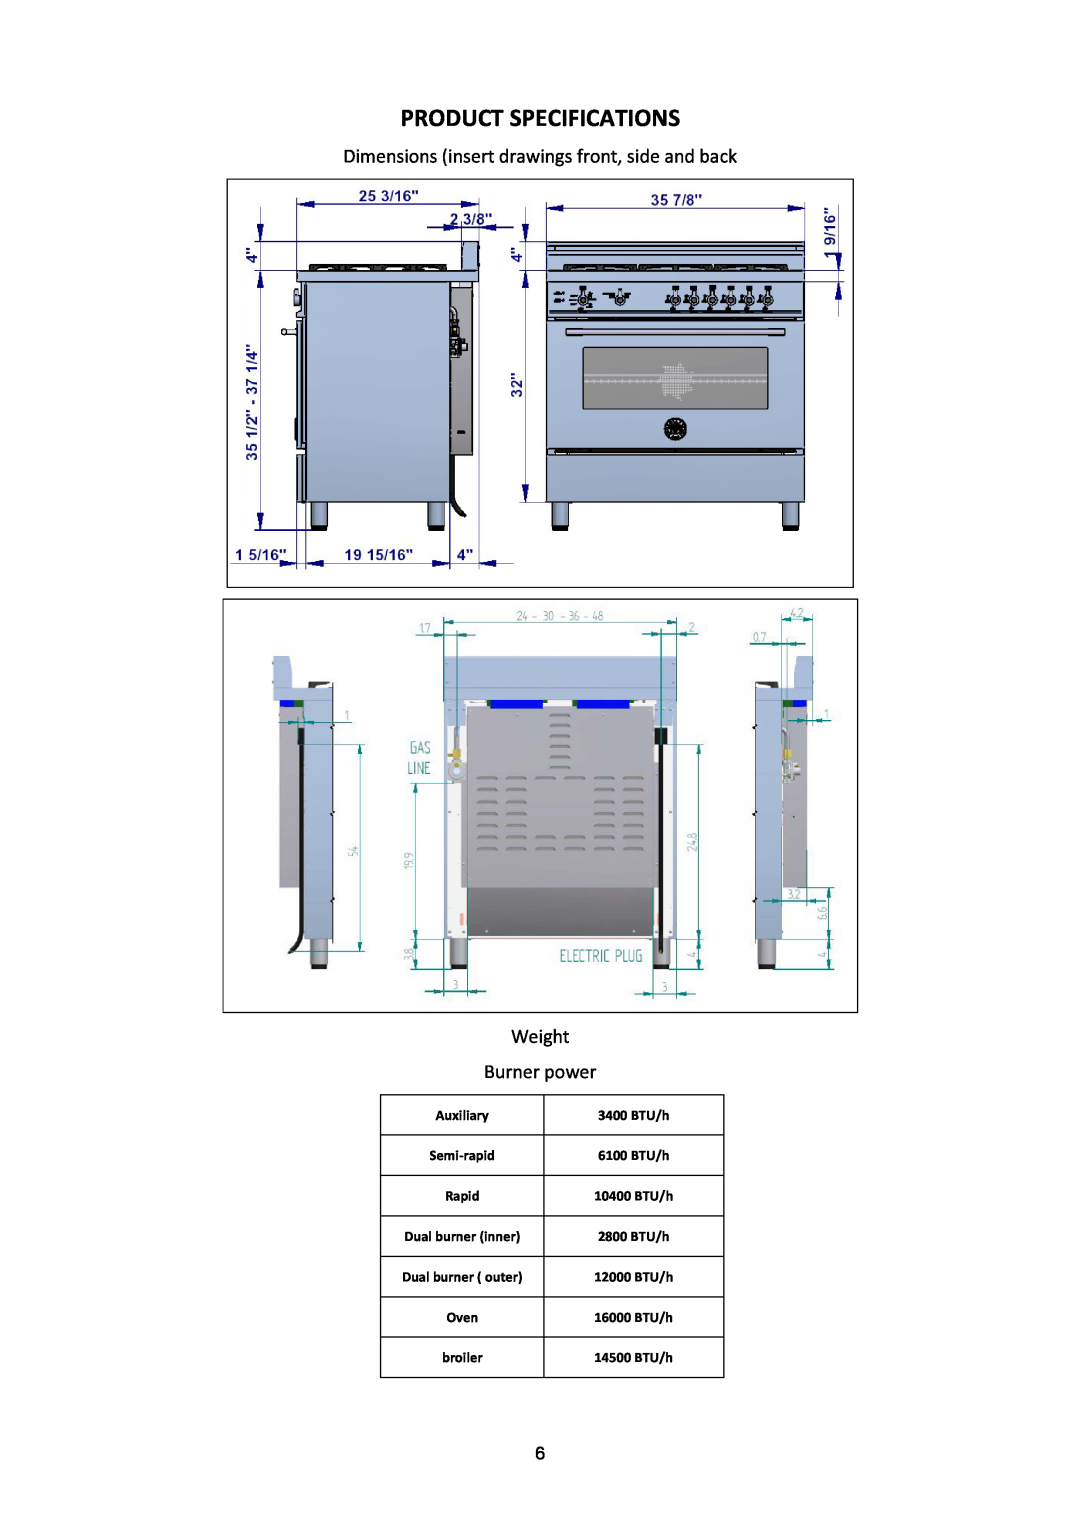 Bertazzoni X365GGVGI manual Product Specifications, Dimensions insert drawings front, side and back, Weight Burner power 